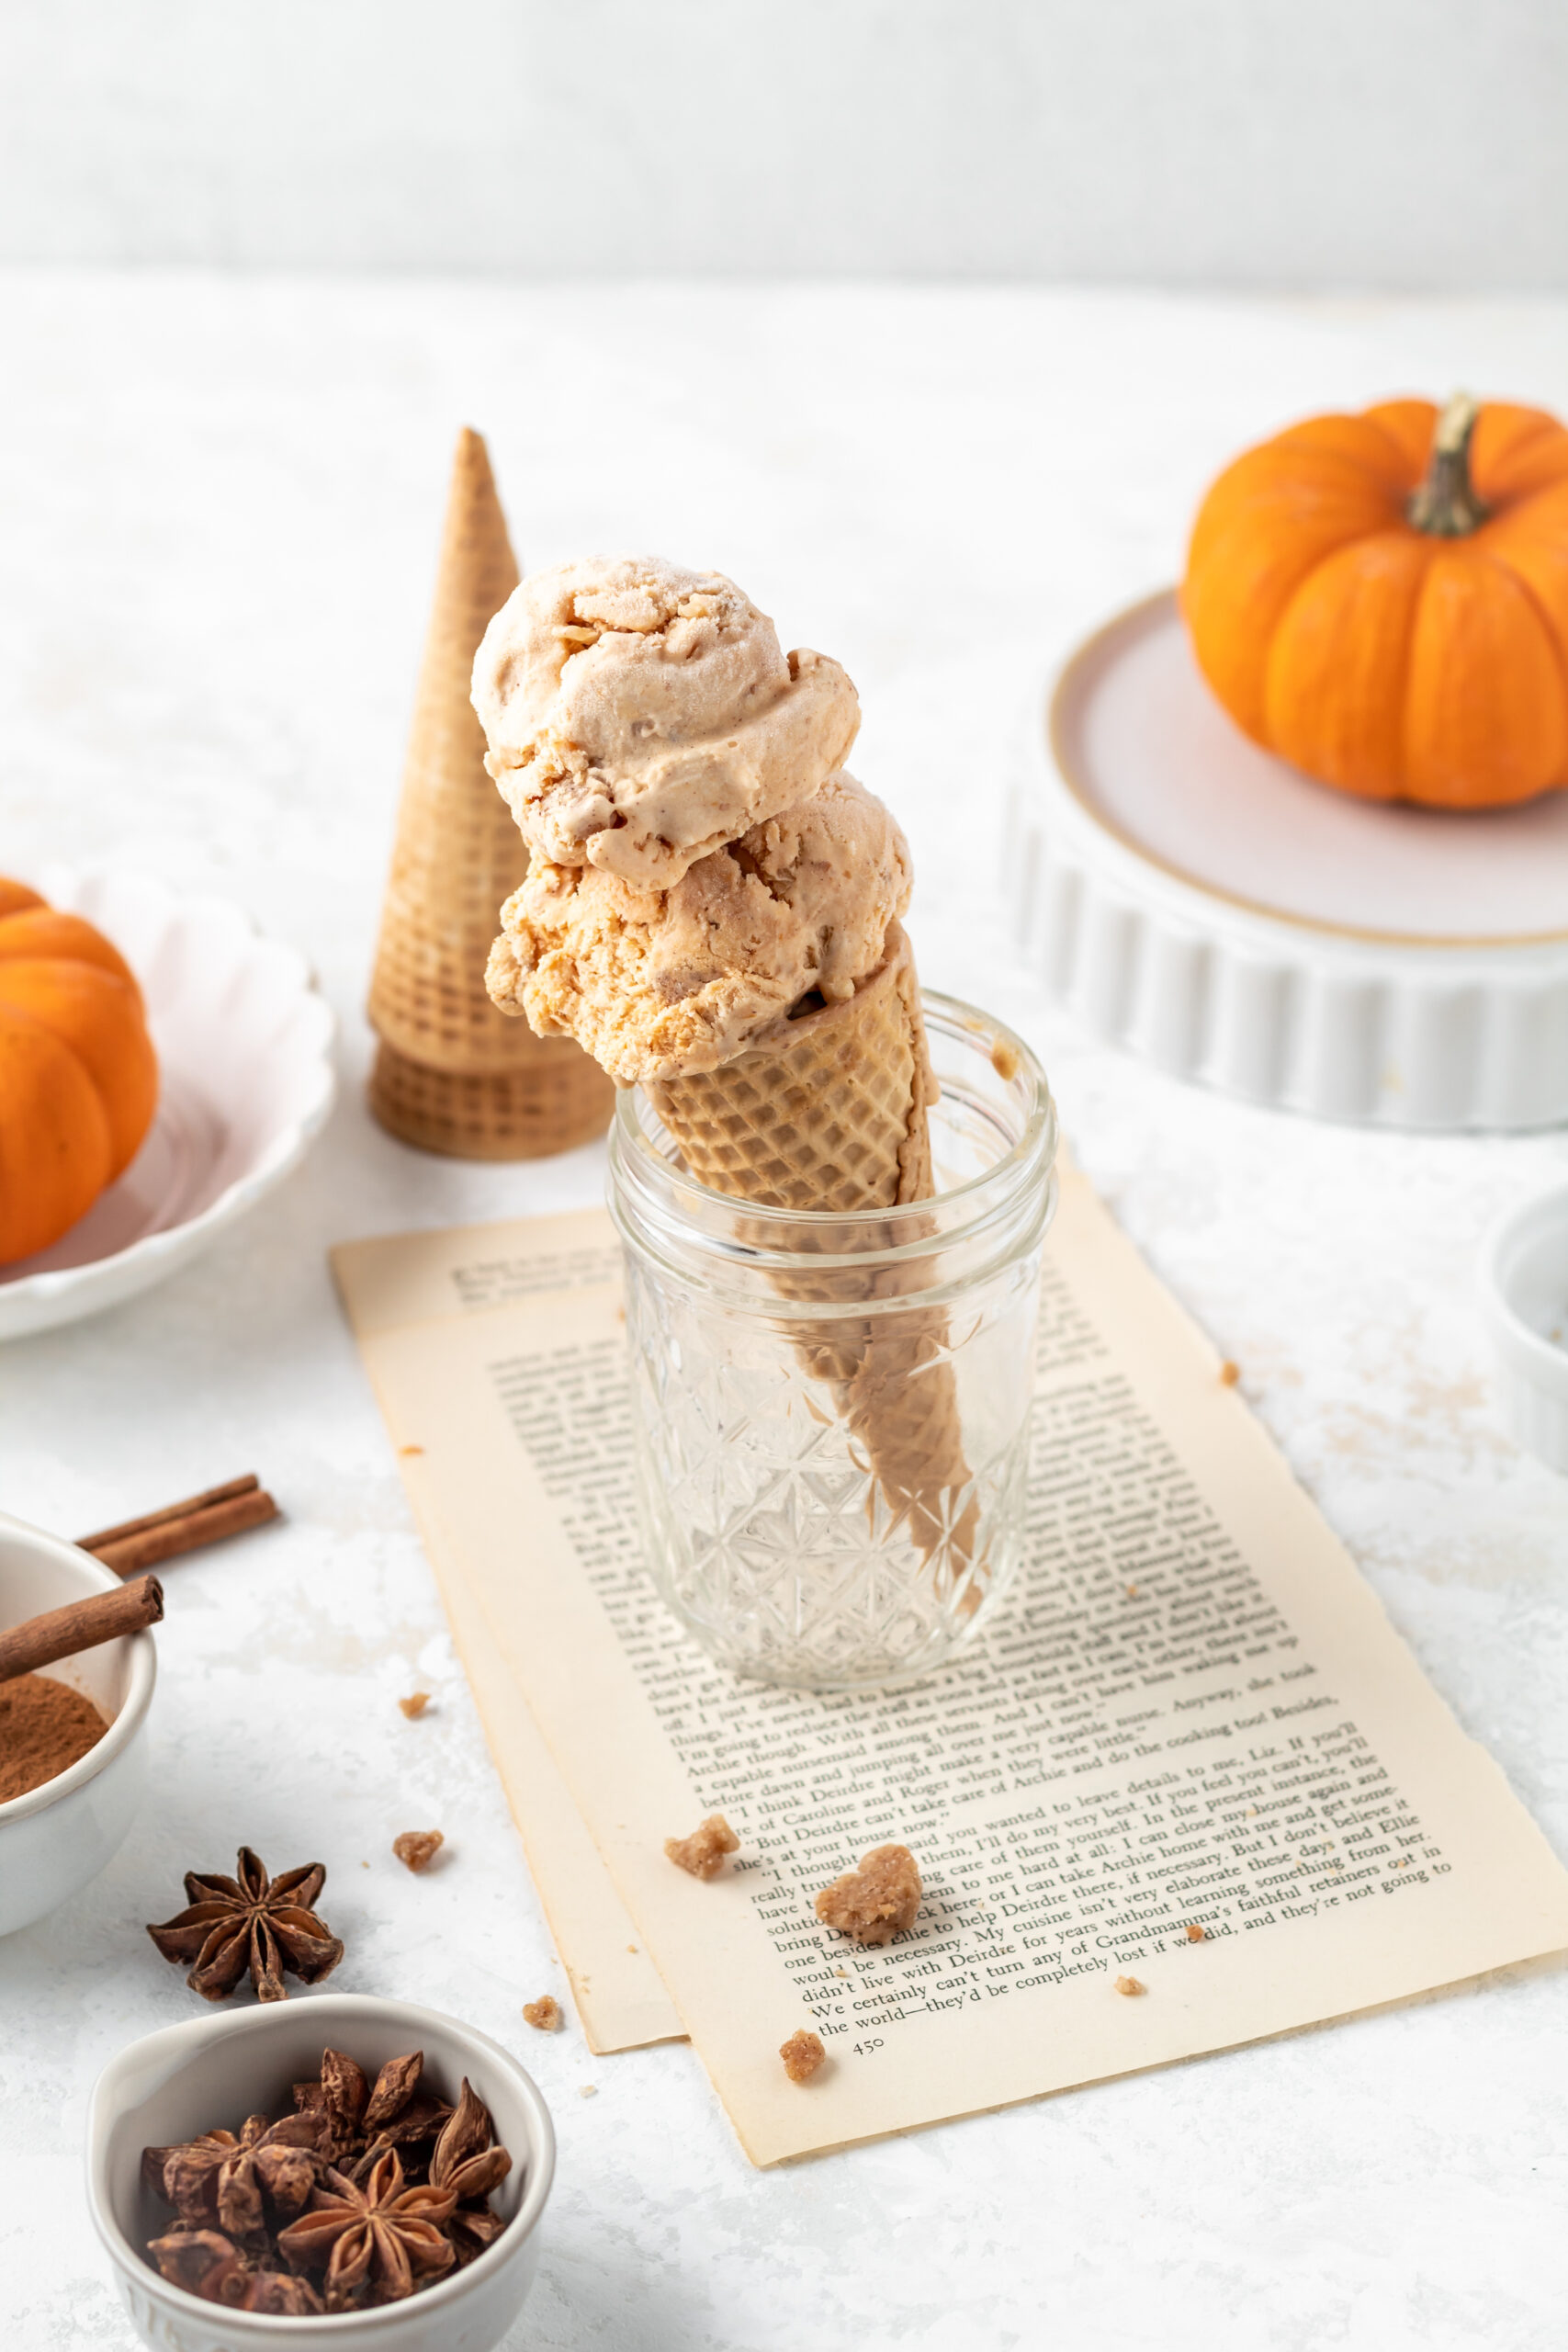 A pumpkin ice cream cone and some tiny pumpkins and spices nearby.